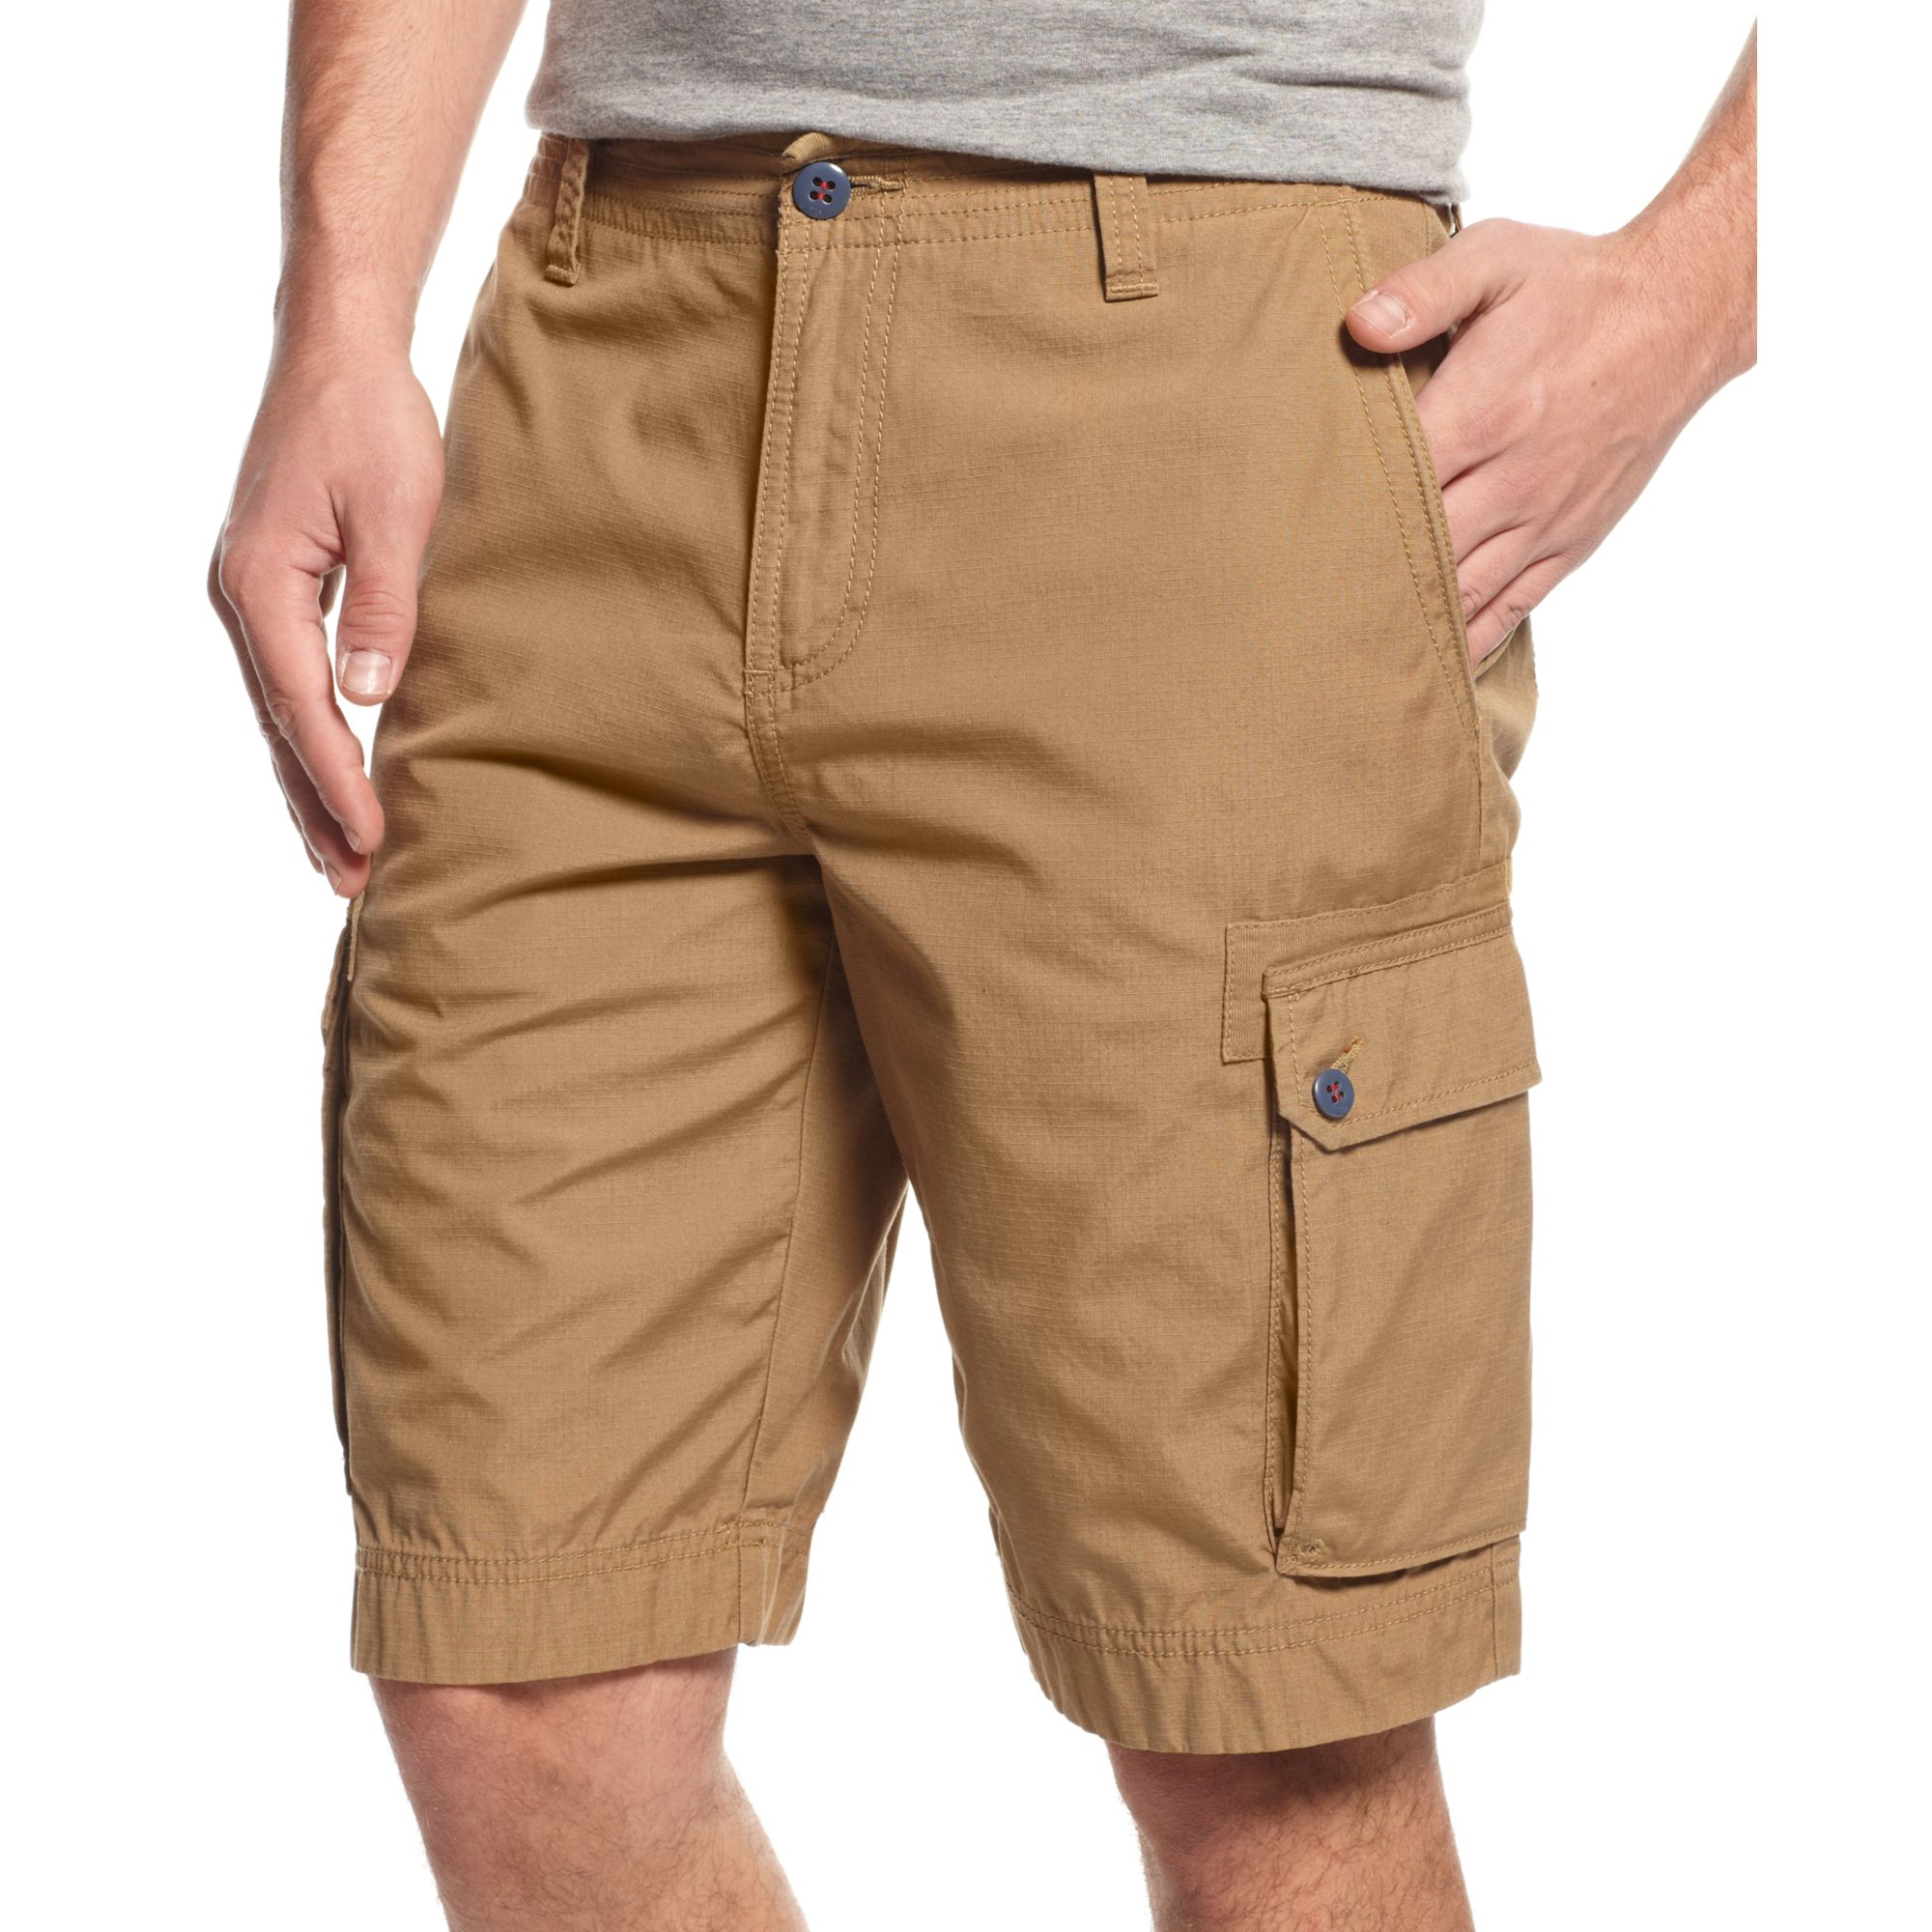 Tommy Hilfiger Ripstop Cargo Shorts in Brown for Men - Lyst